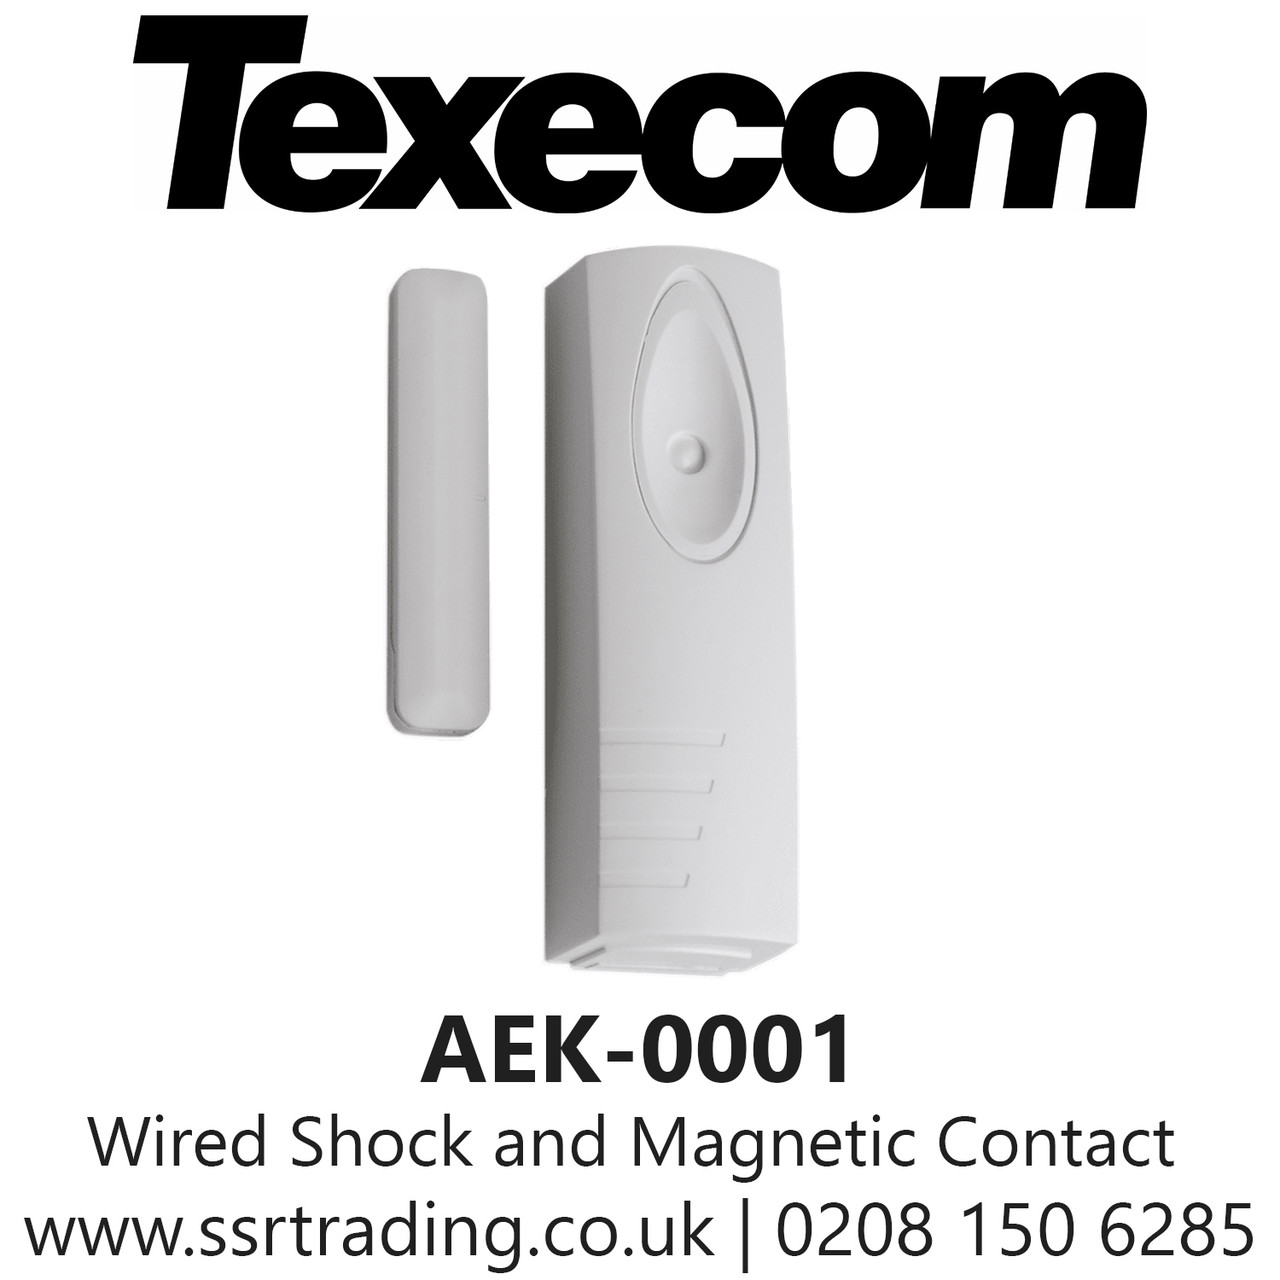 Texecom Impaq Wired Shock and Magnetic Contact- AEK-0001